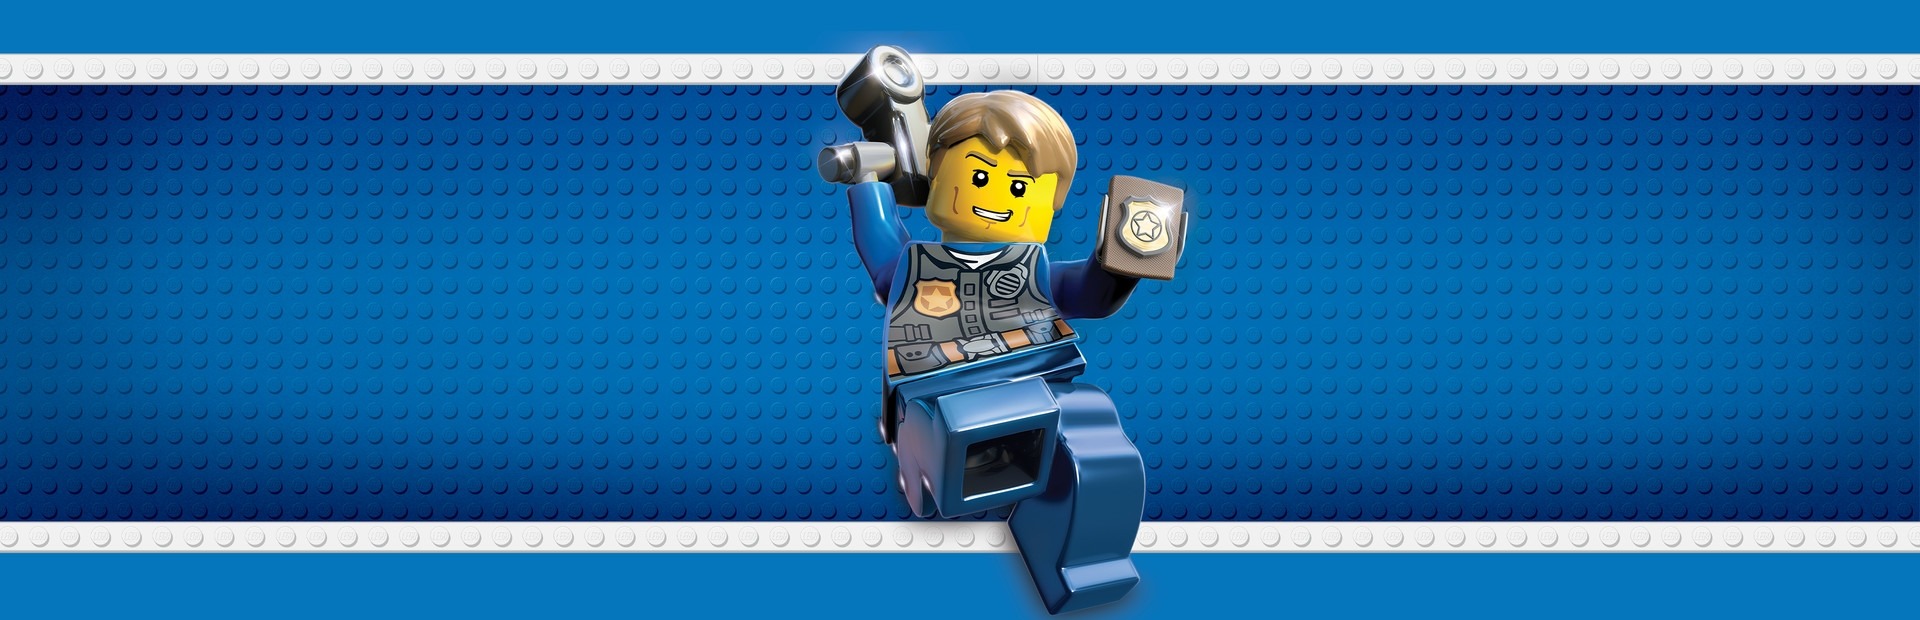 Lego City: Undercover Switch